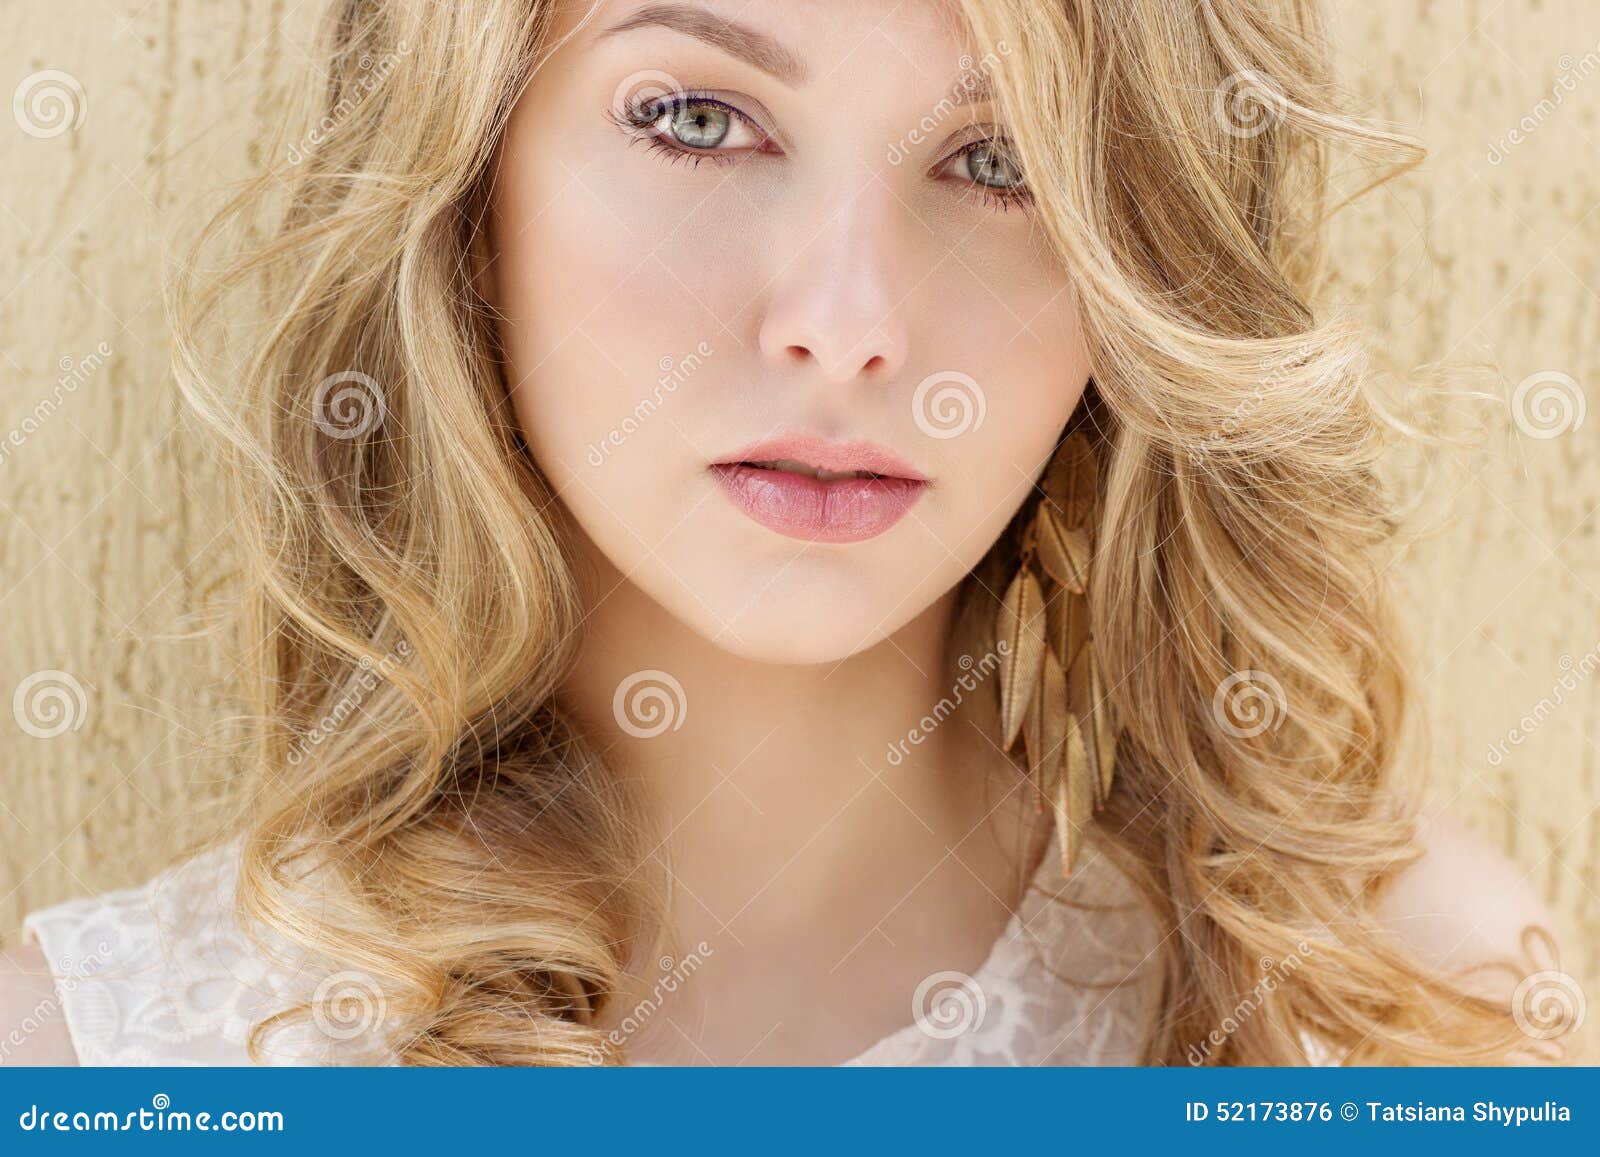 Beauty Woman Full Height with Big Lips Stock Image - Image of hair, girl:  80553473